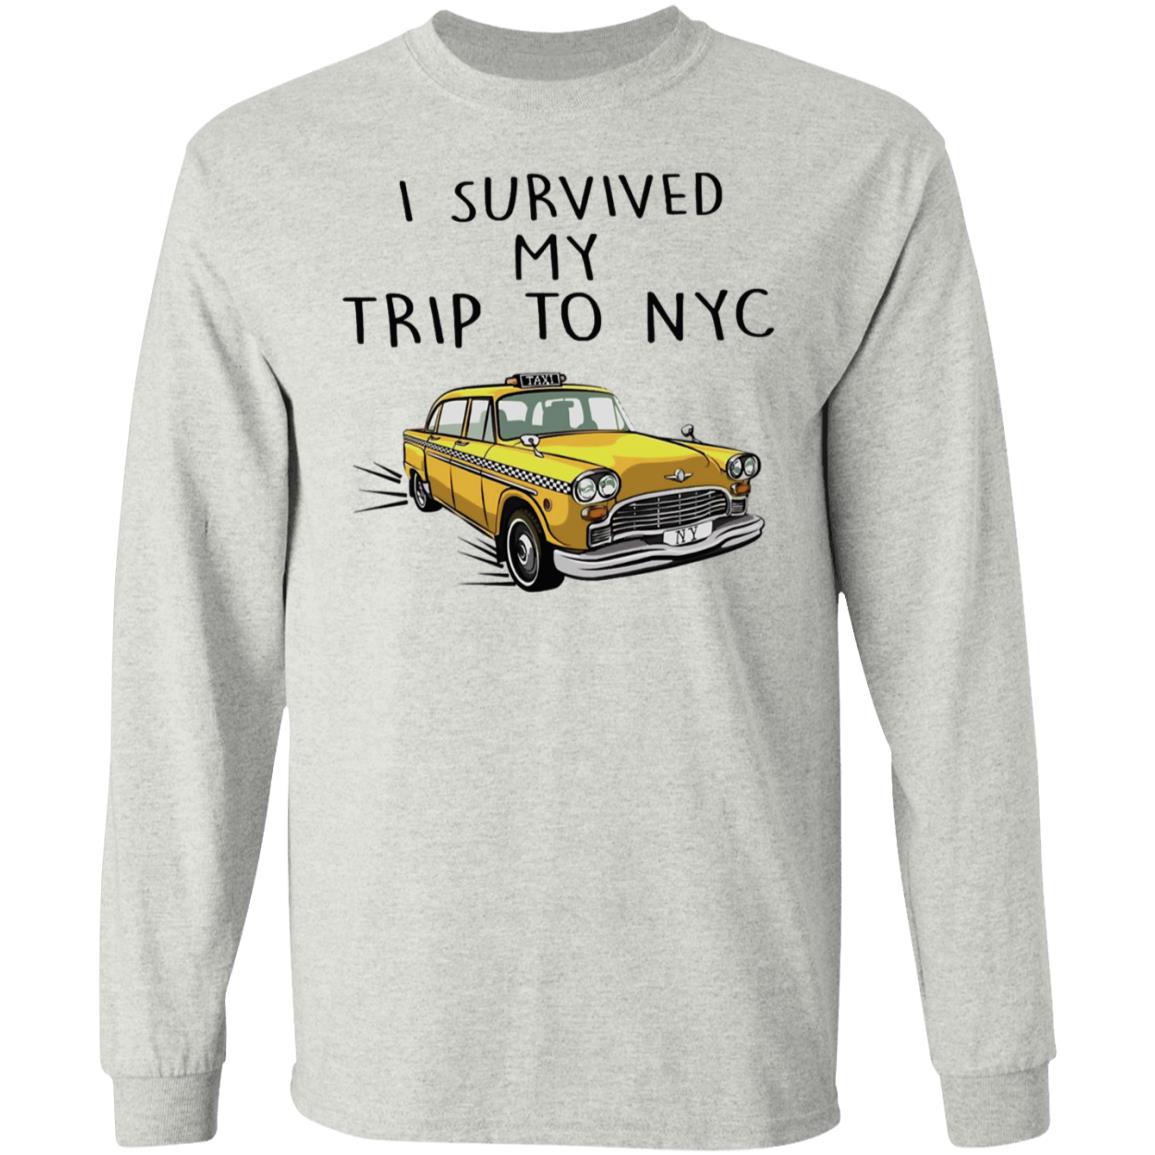 I Survived My Trip To Nyc Shirt - 10% Off - FavorMerch